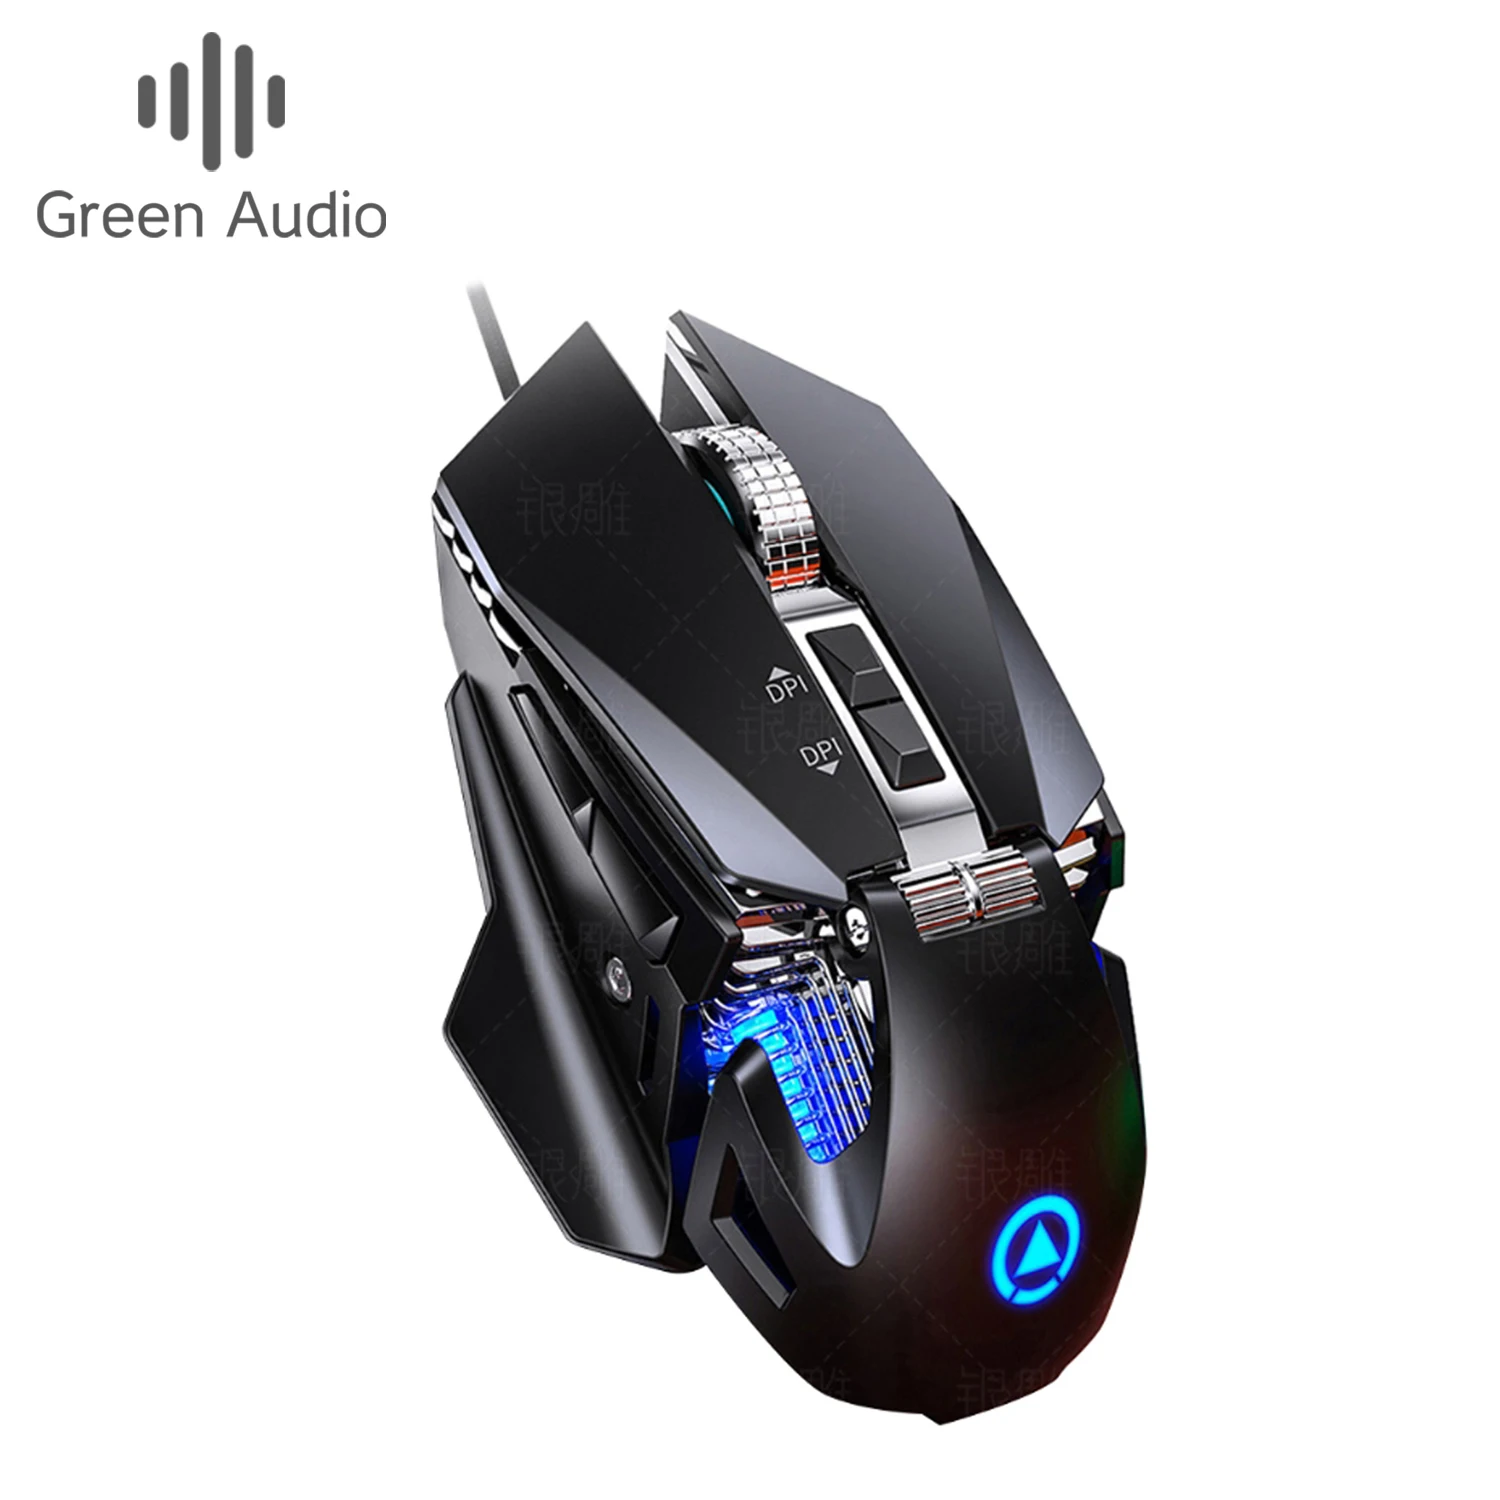 

GAZ-M14 Newest 7 Color Illuminated USB Wired Mouse Gamer 7200DPI Mechanical RGB Gaming Mouse